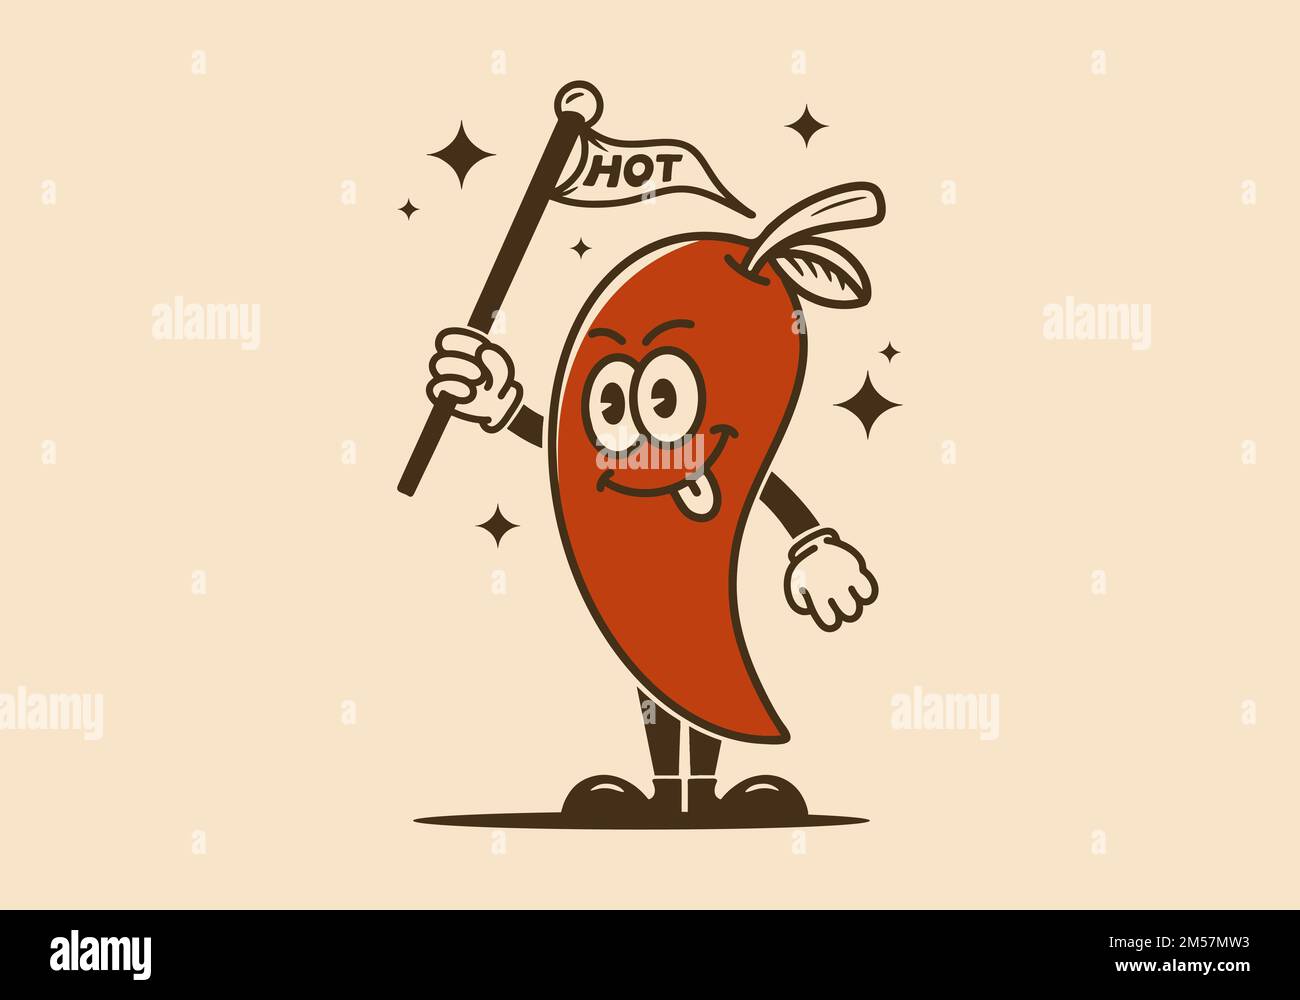 Illustration art design of a chili character with arms and legs Stock Vector